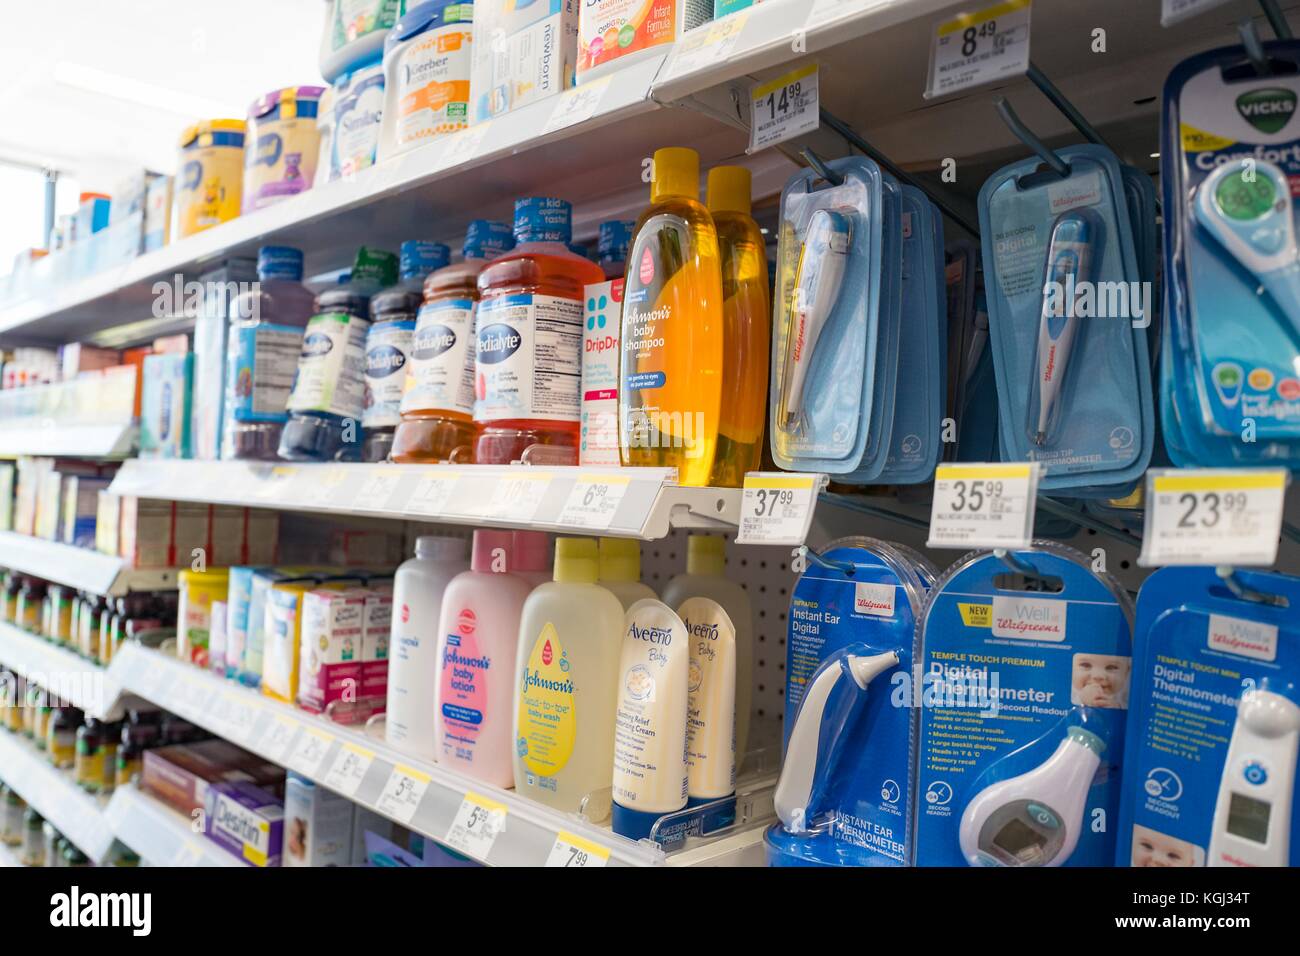 Infant and baby care products, including Johnson's products, Pedialyte, and several digital thermometers are visible on the shelves of a pharmacy in San Francisco, California, September 29, 2017. () Stock Photo